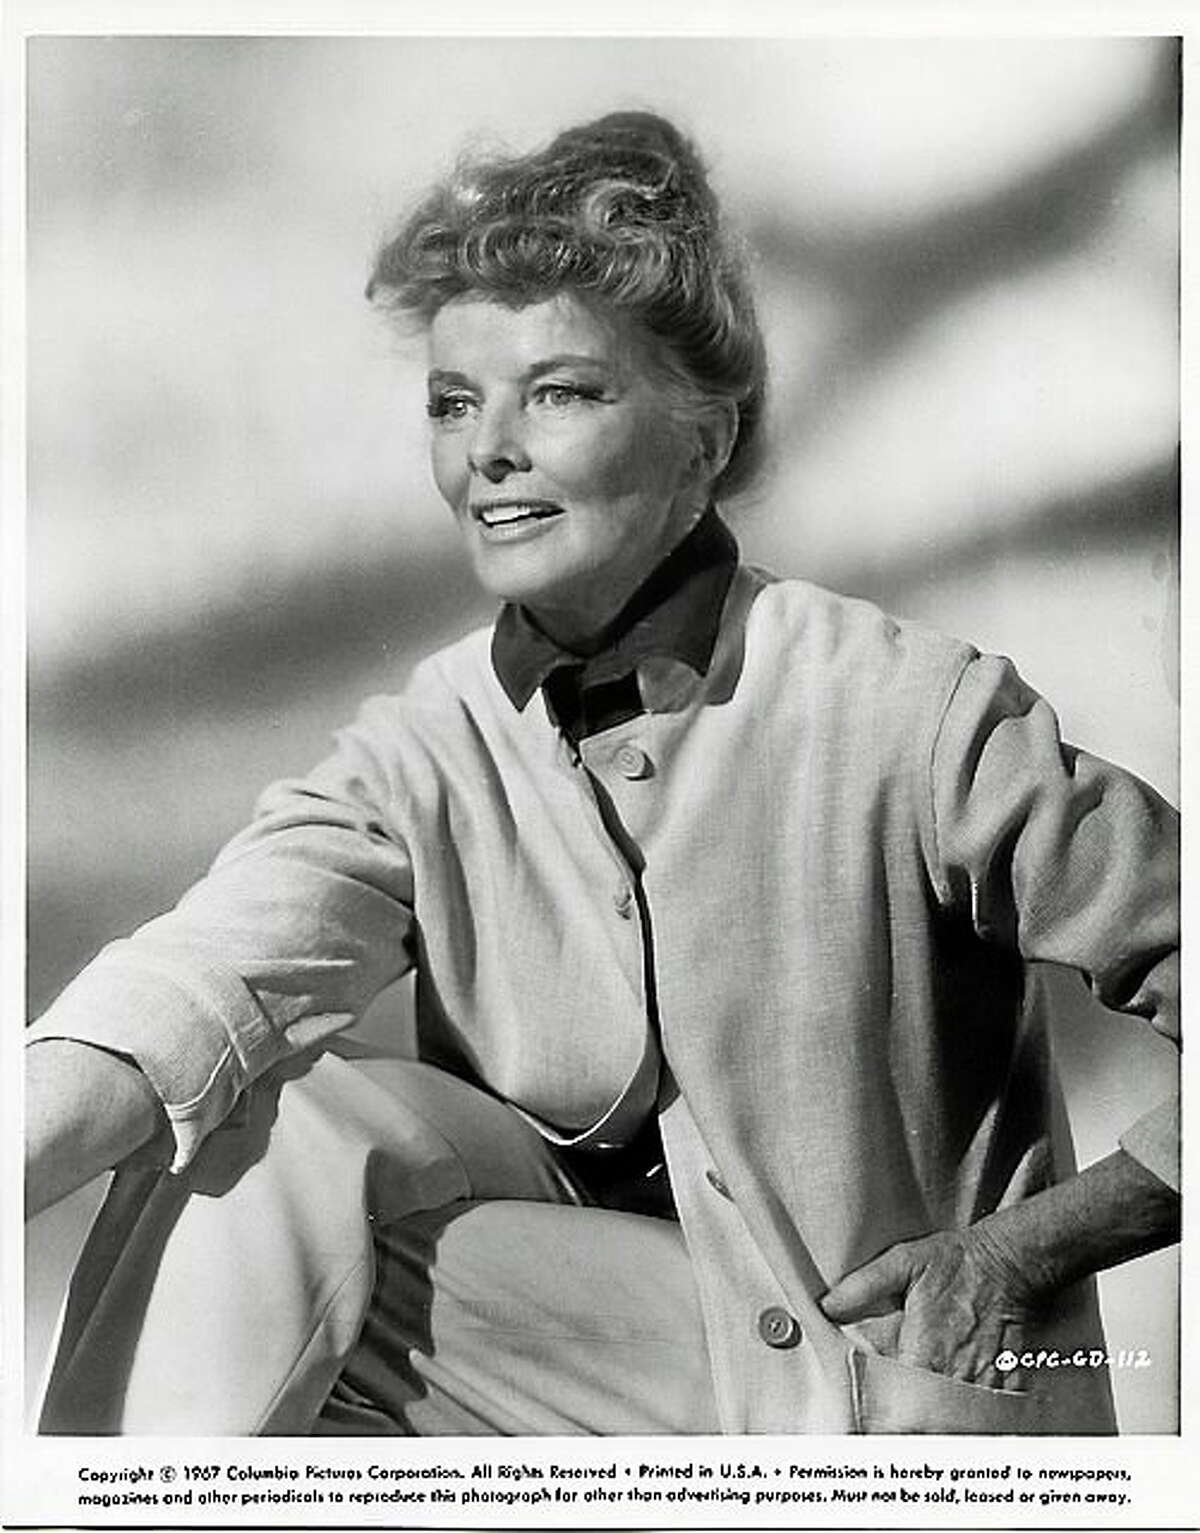 All rights reserved, CT Historical Society Katharine Hepburn: Dressed for Stage and Screen, opens April 11 in Hartford, featuring the First Lady of Cinema's photographs and clothing from her memorable films.